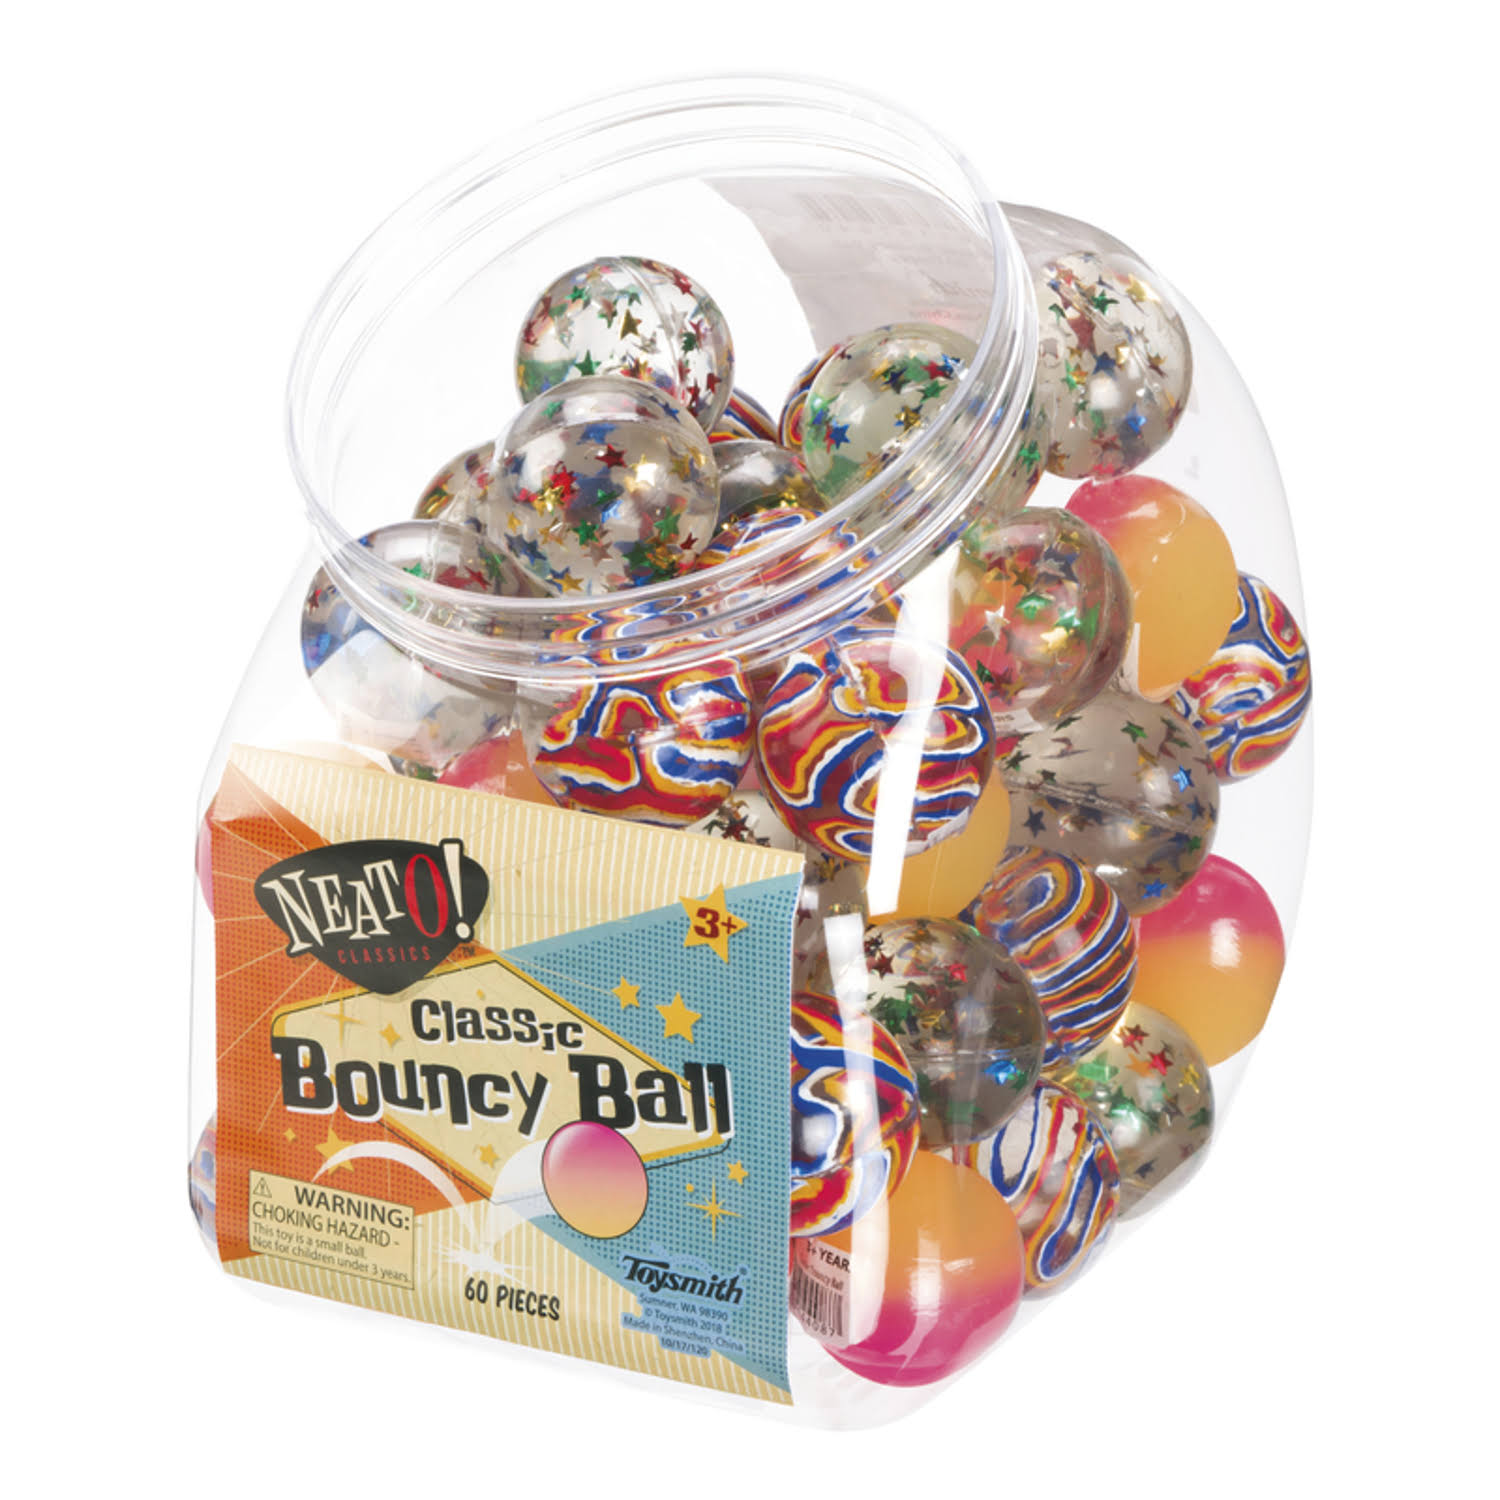 Tobar Toysmith Classic Bouncy Ball - 3 Pack